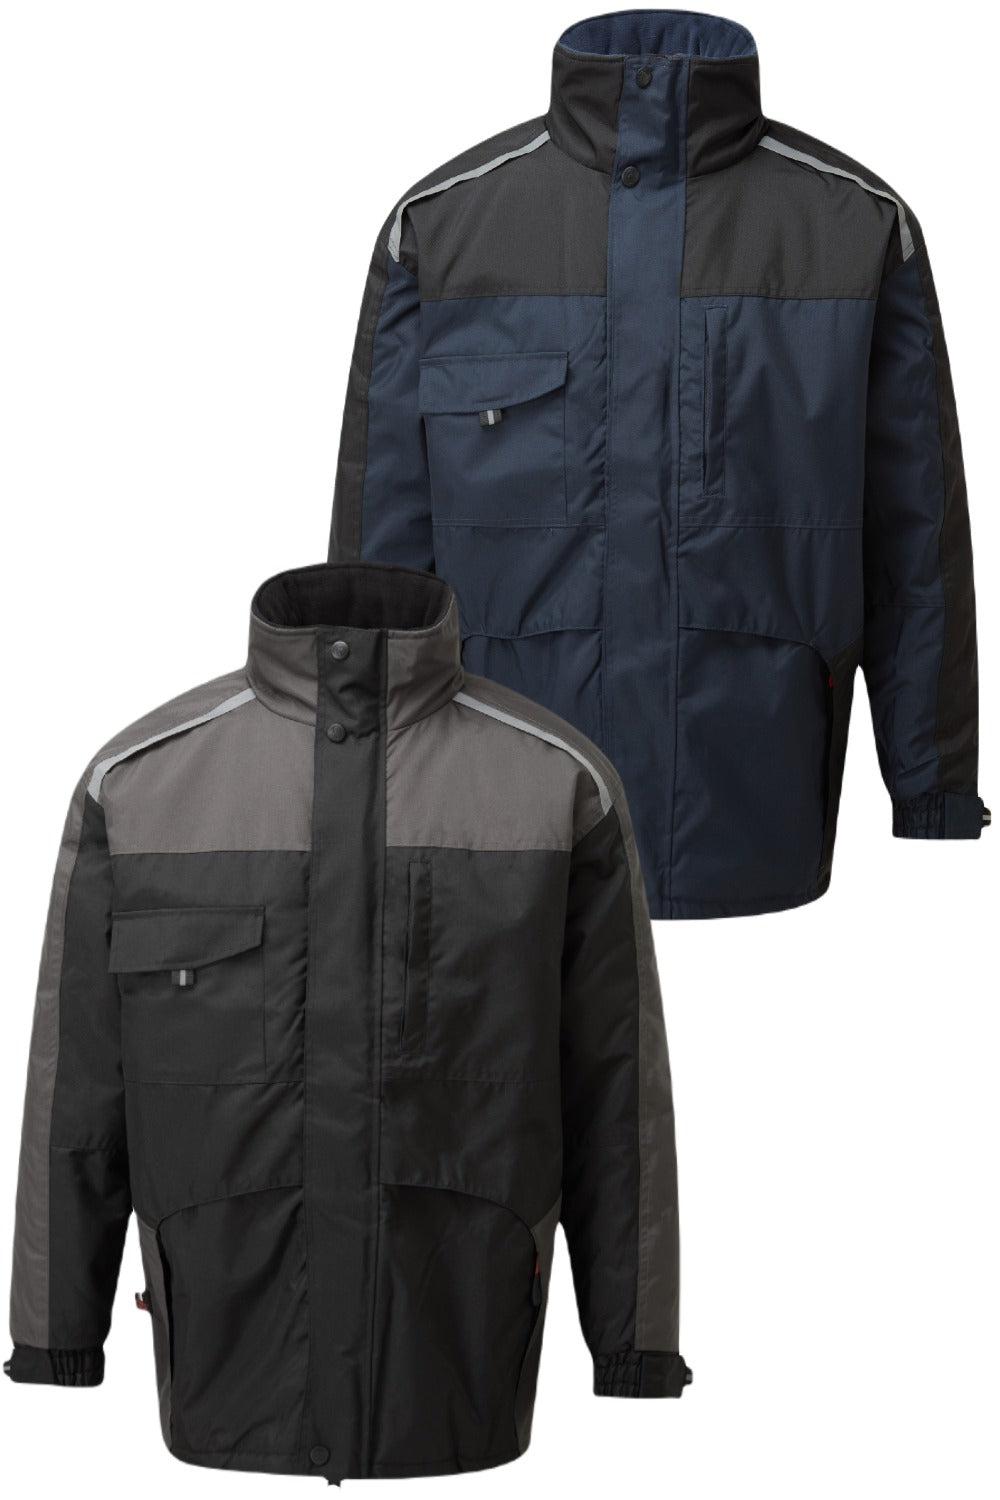 TuffStuff Cleveland Jacket in Black and Navy Blue